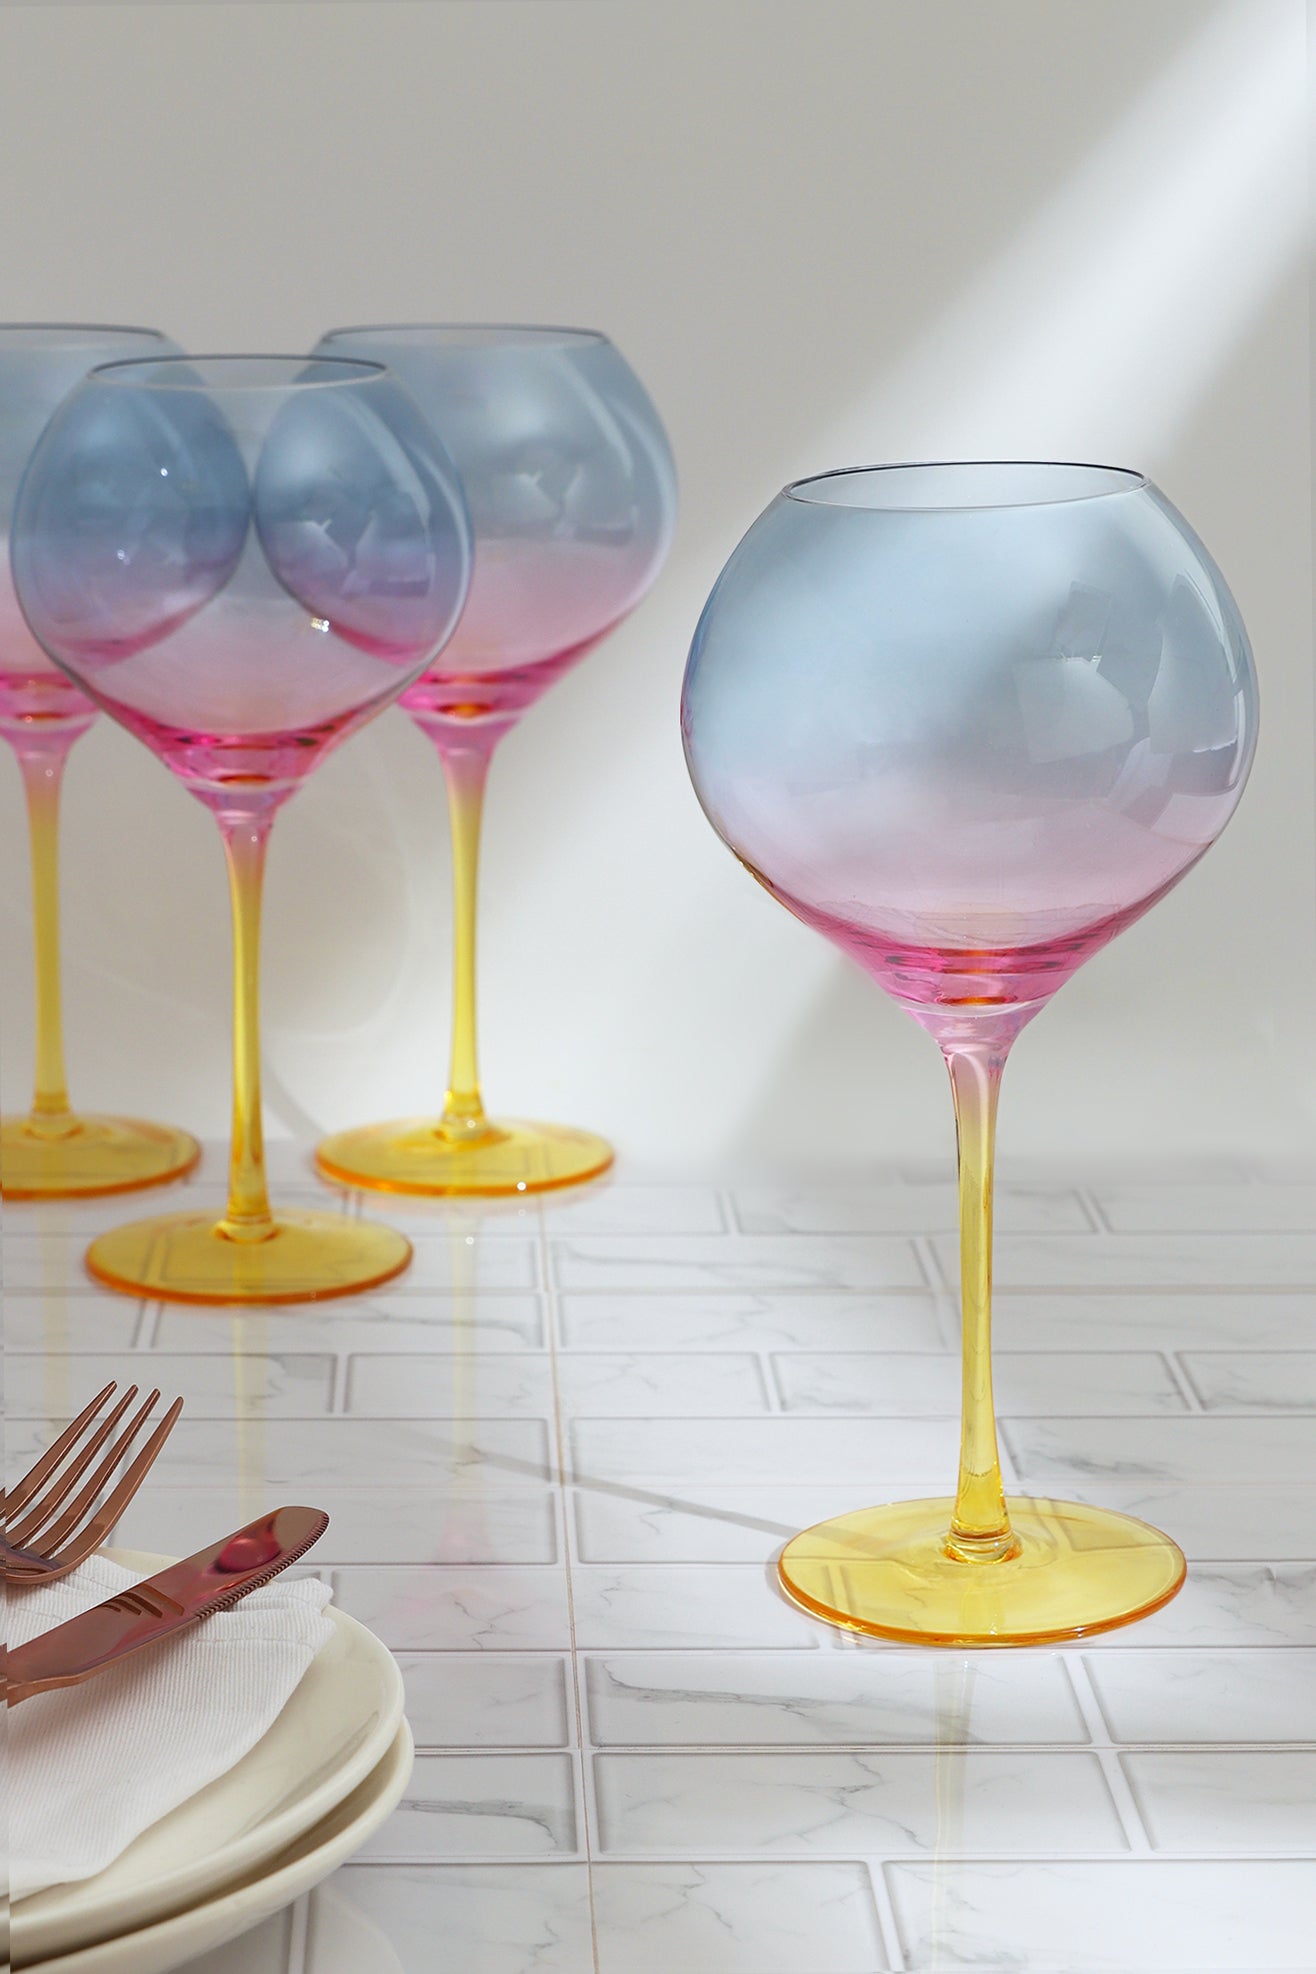 Set of 4 Gin Glasses with a Rainbow Hue